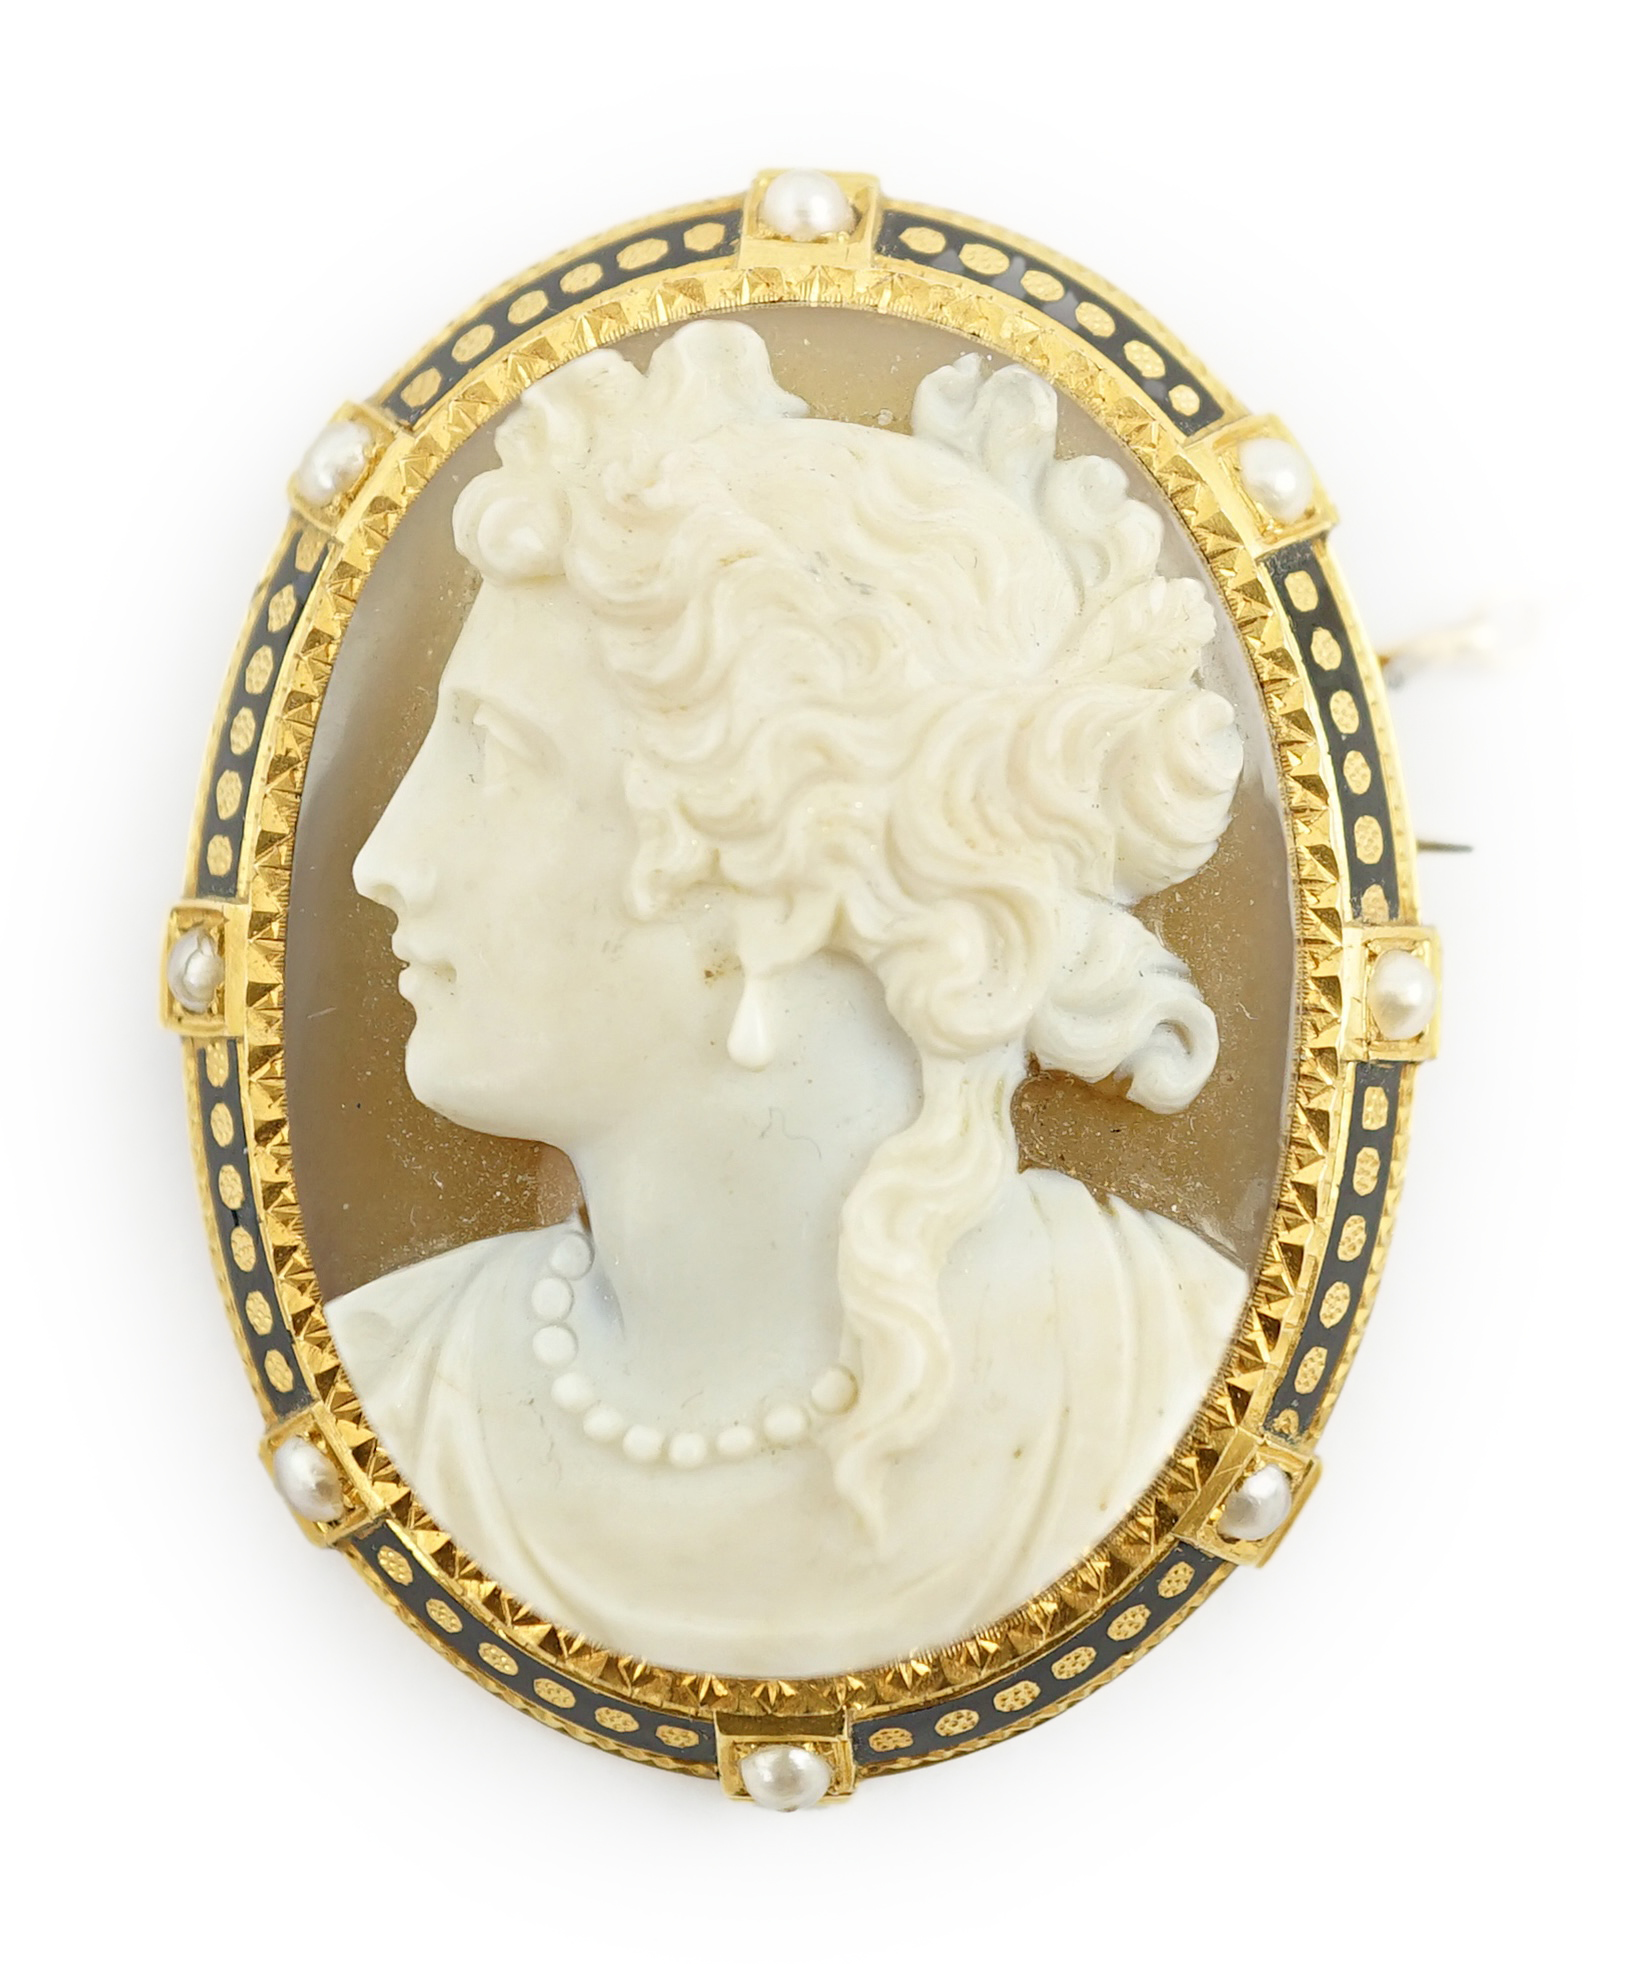 A Victorian gold, enamel and seed pearl mounted oval cameo hardstone brooch